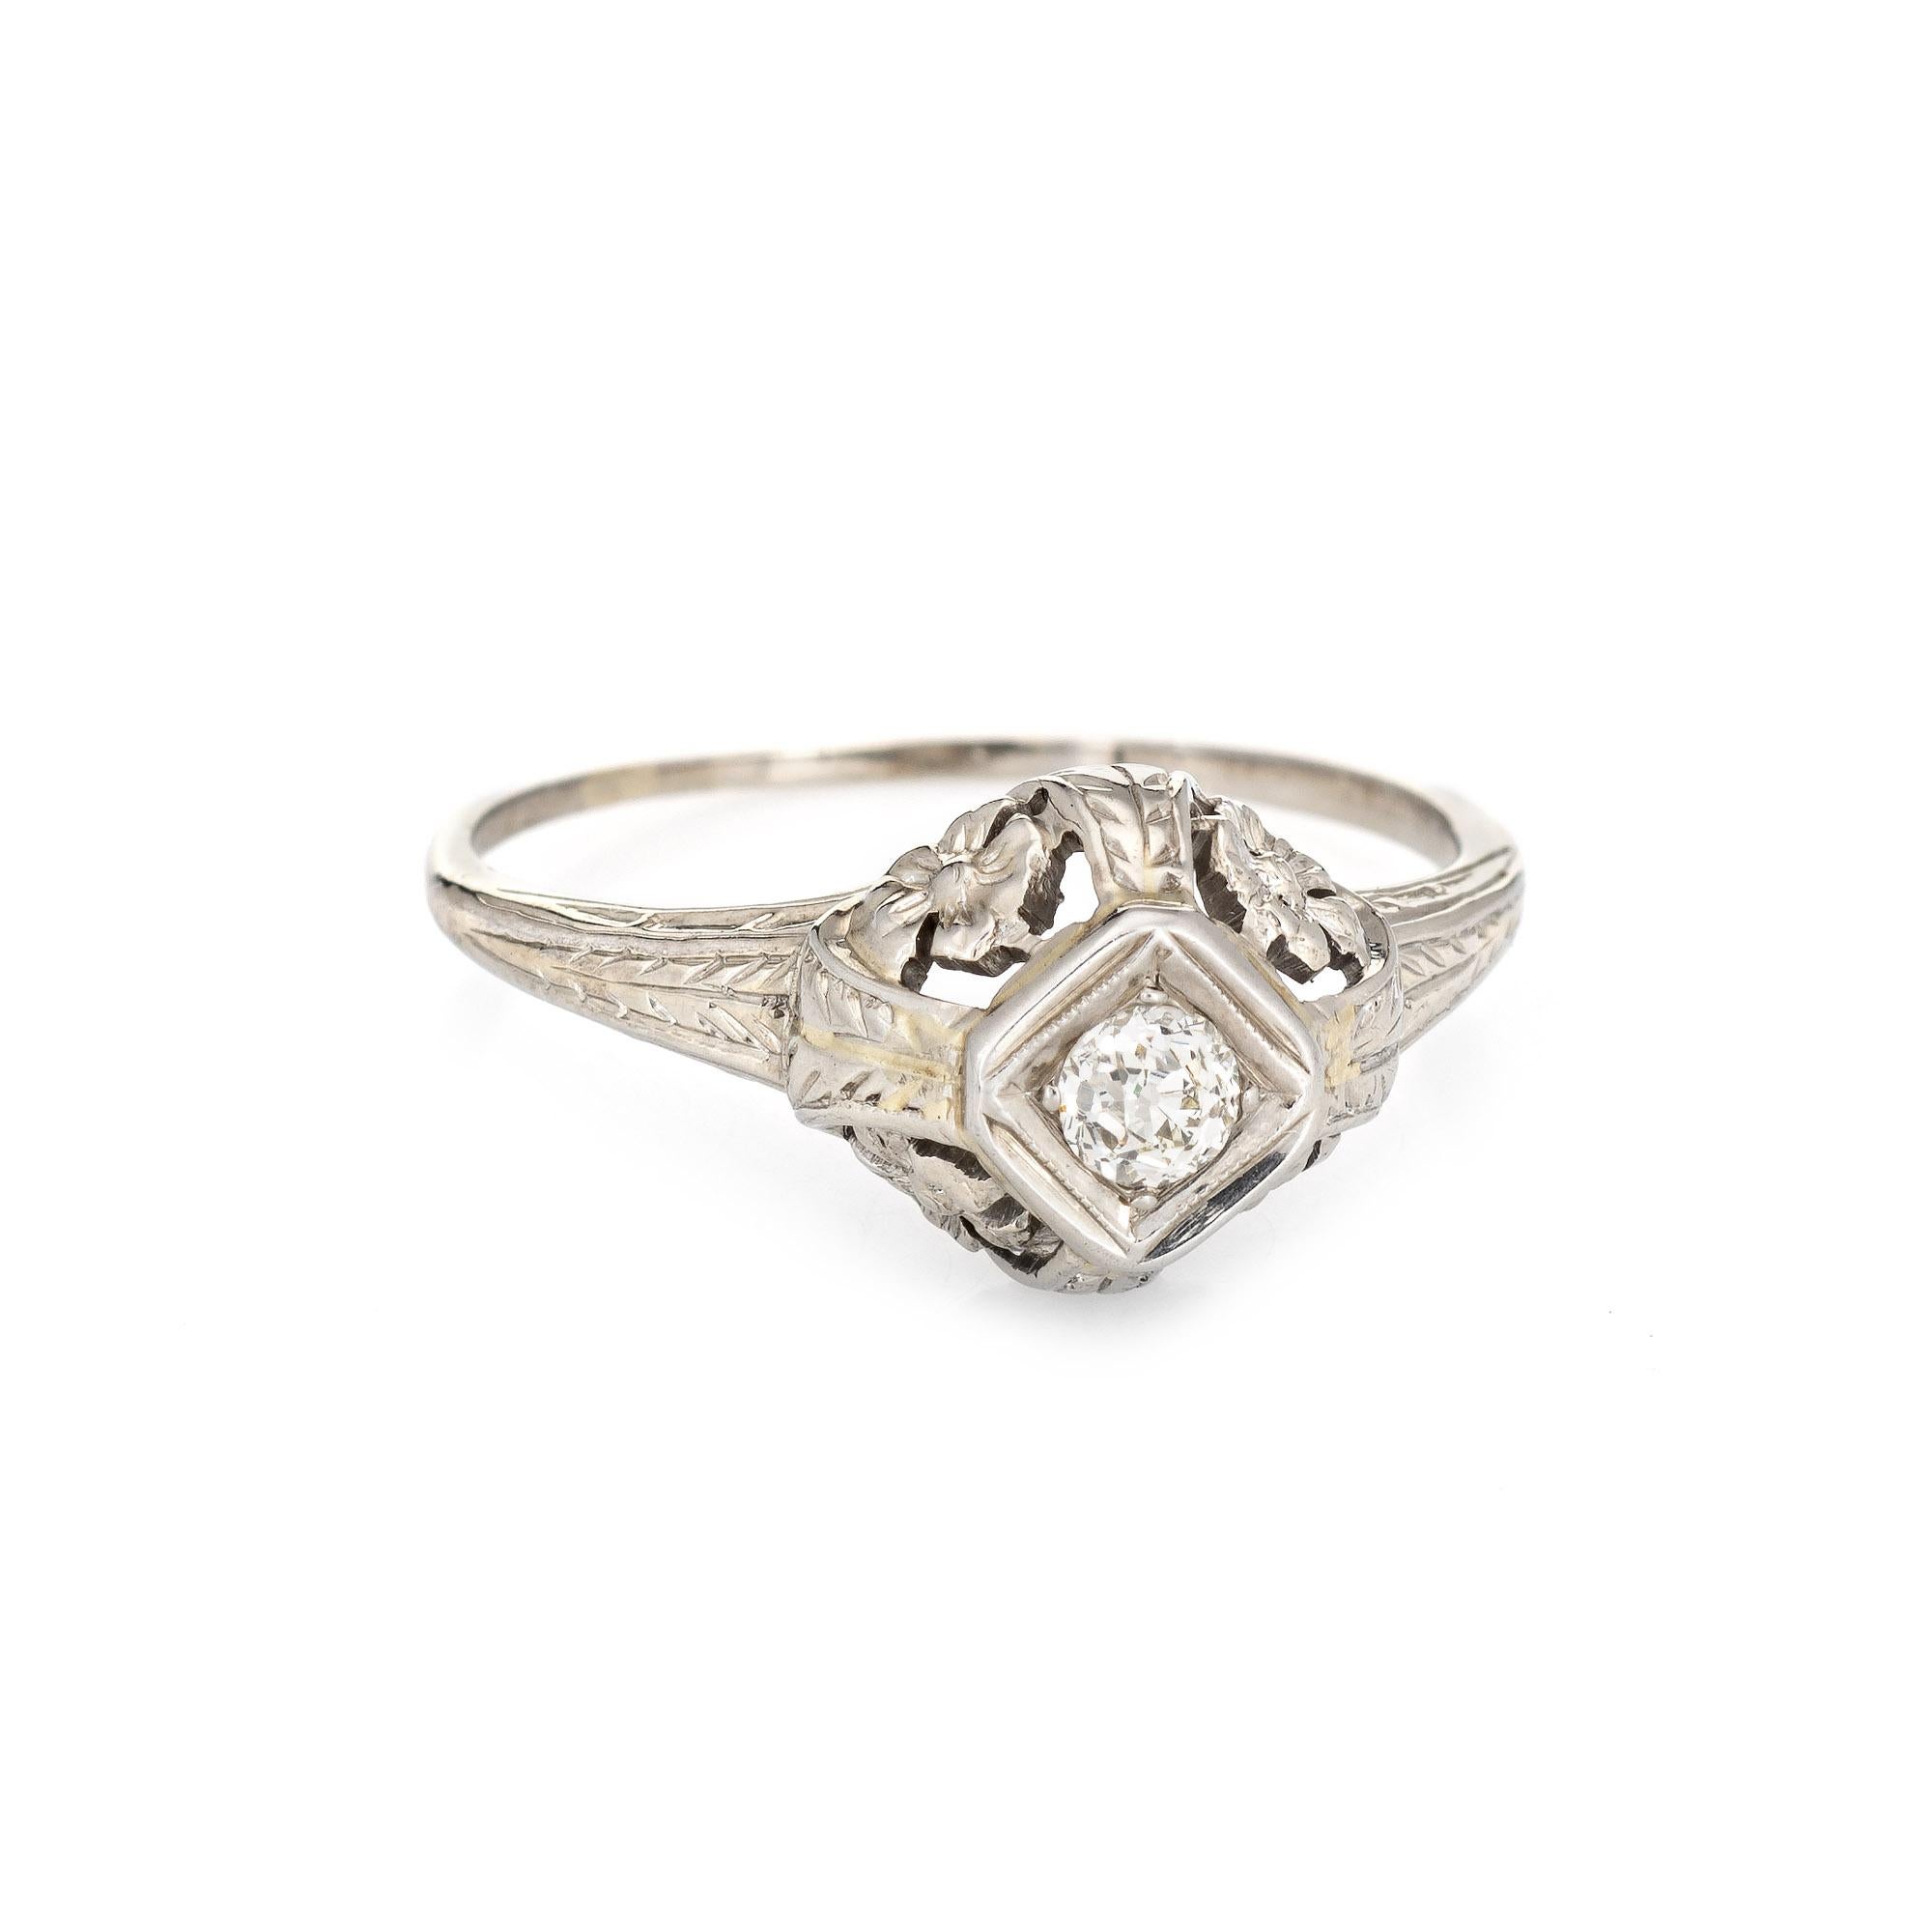 Finely detailed vintage Art Deco diamond engagement ring (circa 1920s to 1930s) crafted in 14 karat white gold. 

One old mine diamond is estimated at 0.20 carats (estimated at J-K color and VS2 clarity). 

The old mine cut diamond is set into an